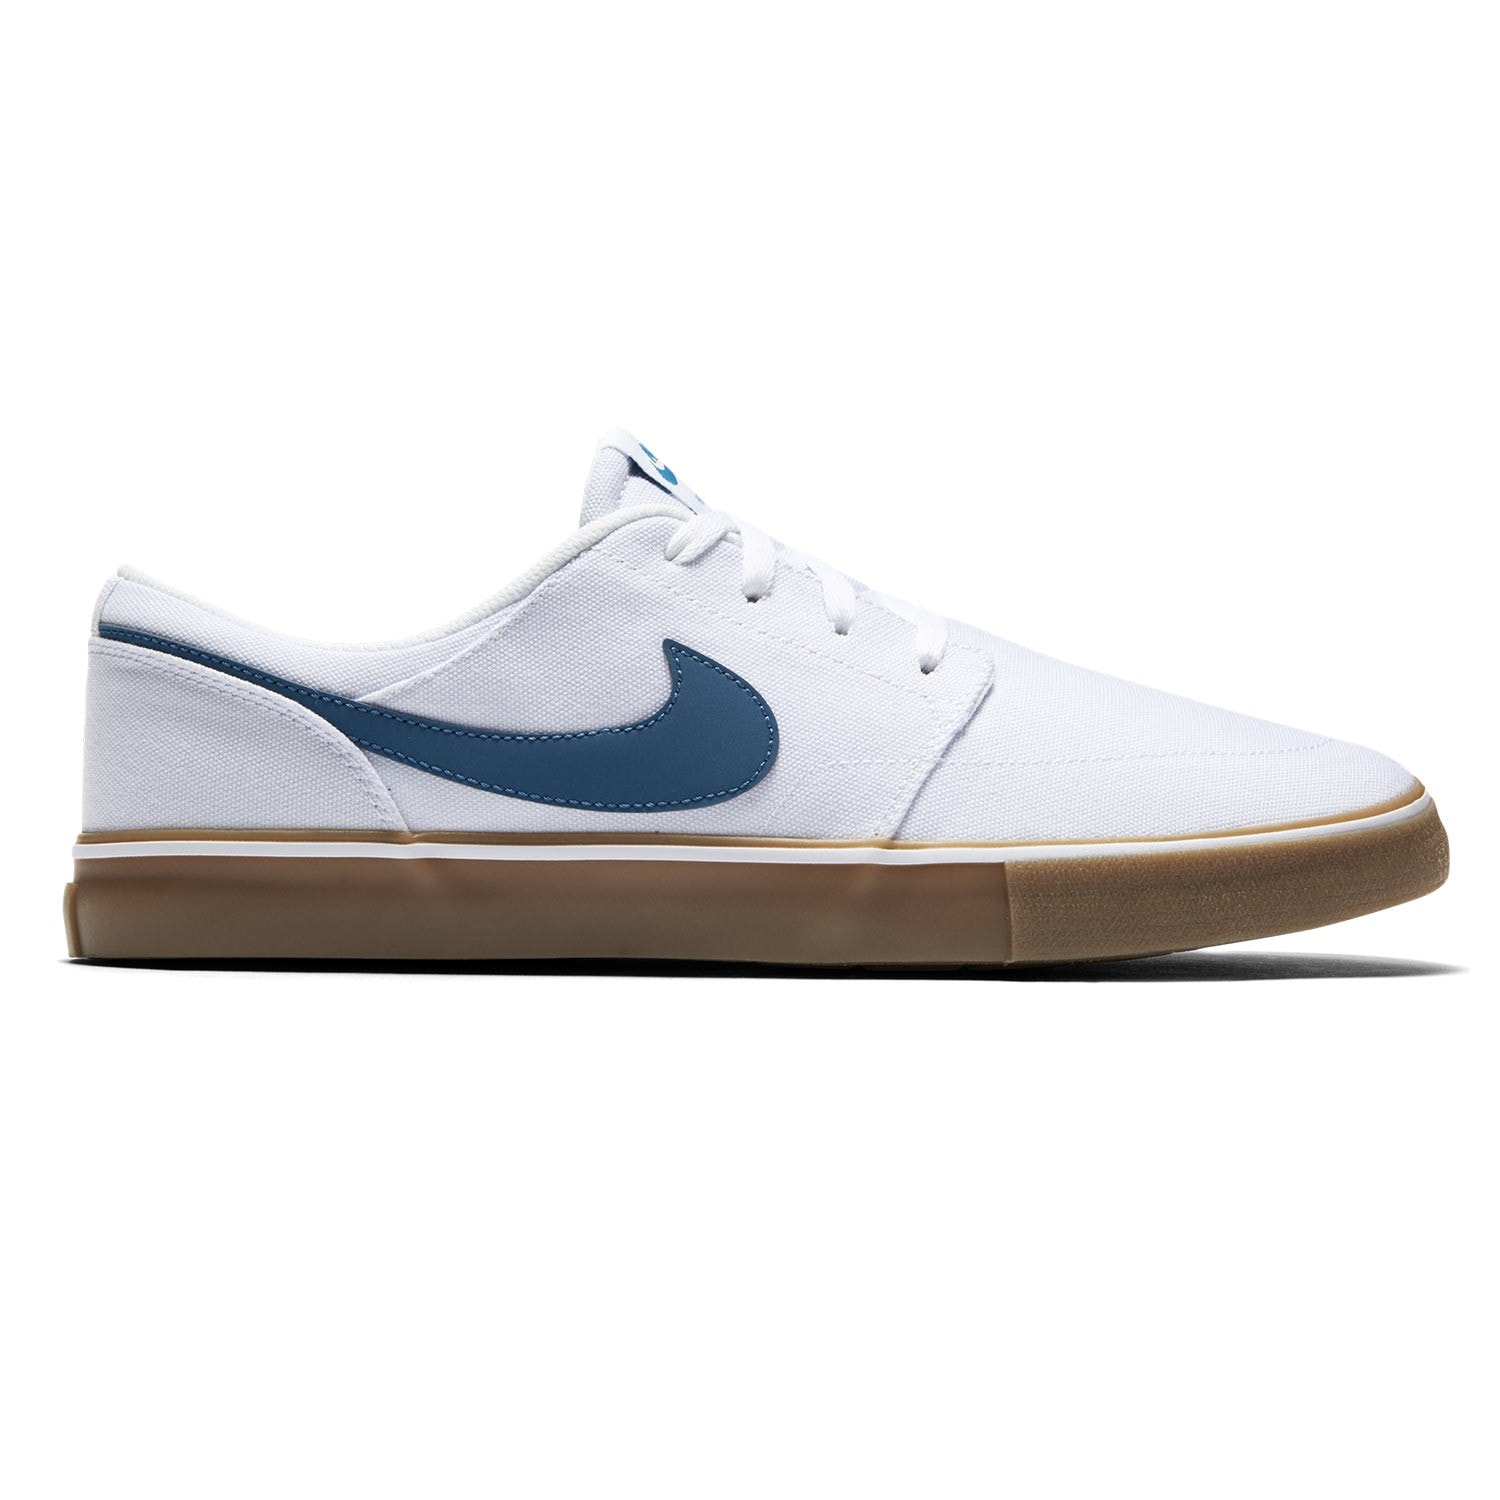 Sneakers Nike Solarsoft Portmore Ii Canvas white/industrial blue-brown | Zezula